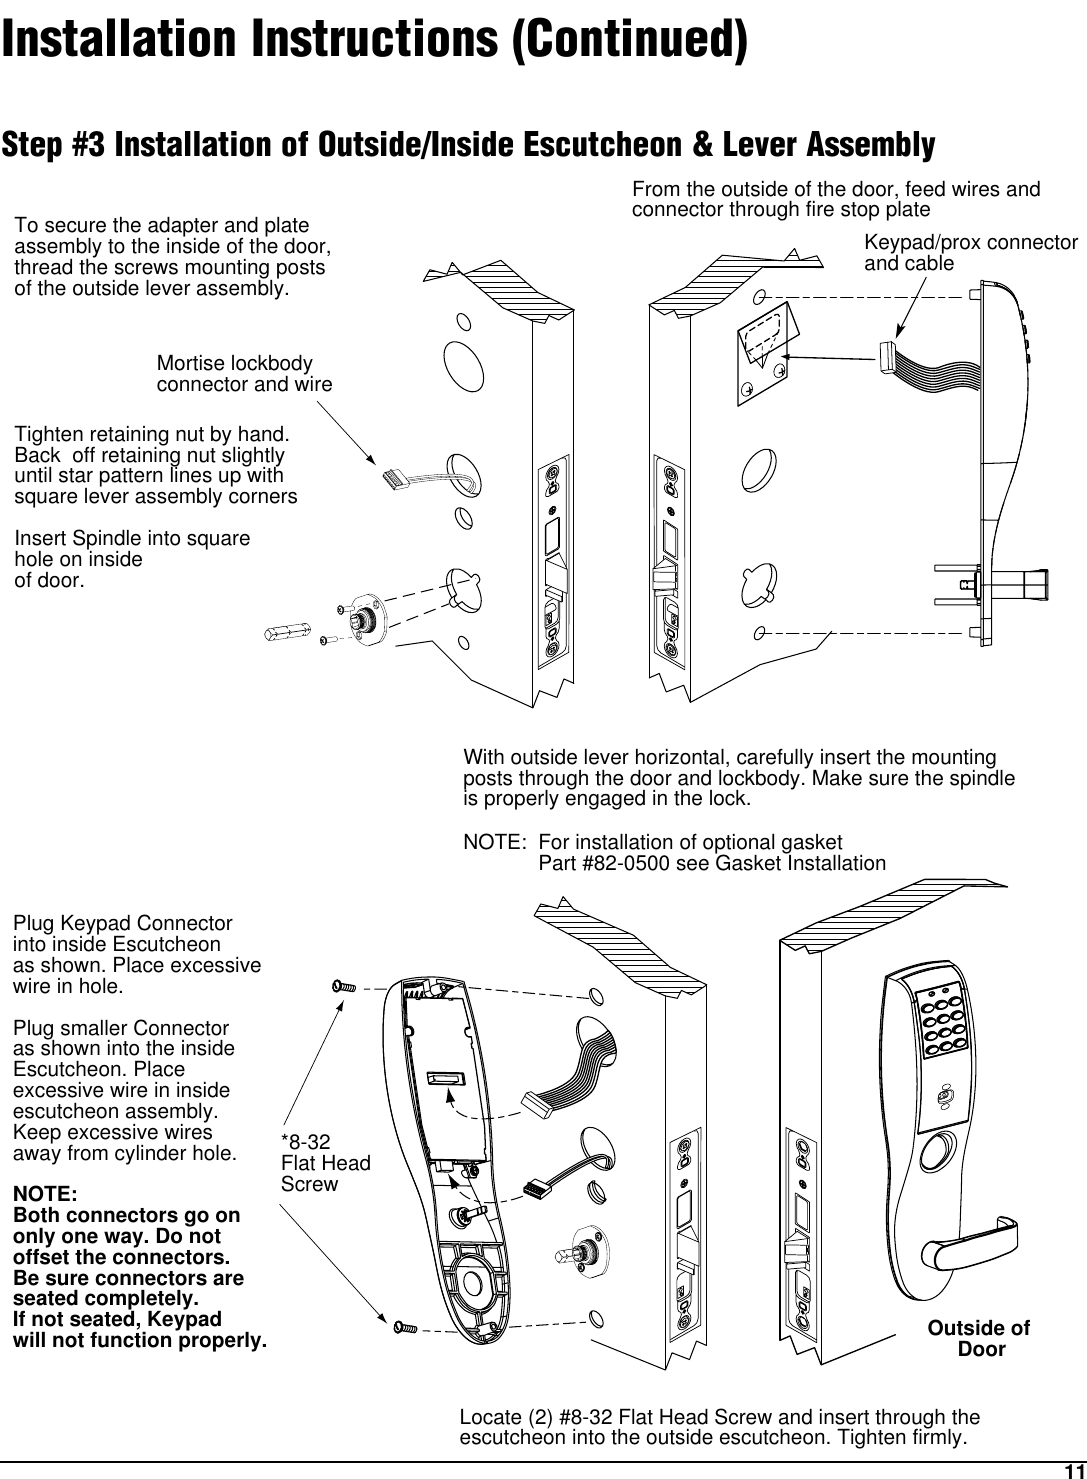 11Outside of DoorMortise lockbody connector and wire*8-32 Flat HeadScrewKeypad/prox connector and cableFrom the outside of the door, feed wires and connector through fire stop plateTo secure the adapter and plate assembly to the inside of the door, thread the screws mounting posts of the outside lever assembly. Tighten retaining nut by hand.Back  off retaining nut slightlyuntil star pattern lines up with square lever assembly cornersInsert Spindle into square hole on inside of door.With outside lever horizontal, carefully insert the mounting posts through the door and lockbody. Make sure the spindle is properly engaged in the lock.NOTE: For installation of optional gasket Part #82-0500 see Gasket InstallationLocate (2) #8-32 Flat Head Screw and insert through the escutcheon into the outside escutcheon. Tighten firmly.Plug Keypad Connectorinto inside Escutcheonas shown. Place excessivewire in hole.Plug smaller Connectoras shown into the insideEscutcheon. Place excessive wire in inside escutcheon assembly. Keep excessive wires away from cylinder hole.NOTE:Both connectors go ononly one way. Do notoffset the connectors.Be sure connectors areseated completely.If not seated, Keypad will not function properly.Installation Instructions (Continued)Step #3 Installation of Outside/Inside Escutcheon &amp; Lever Assembly